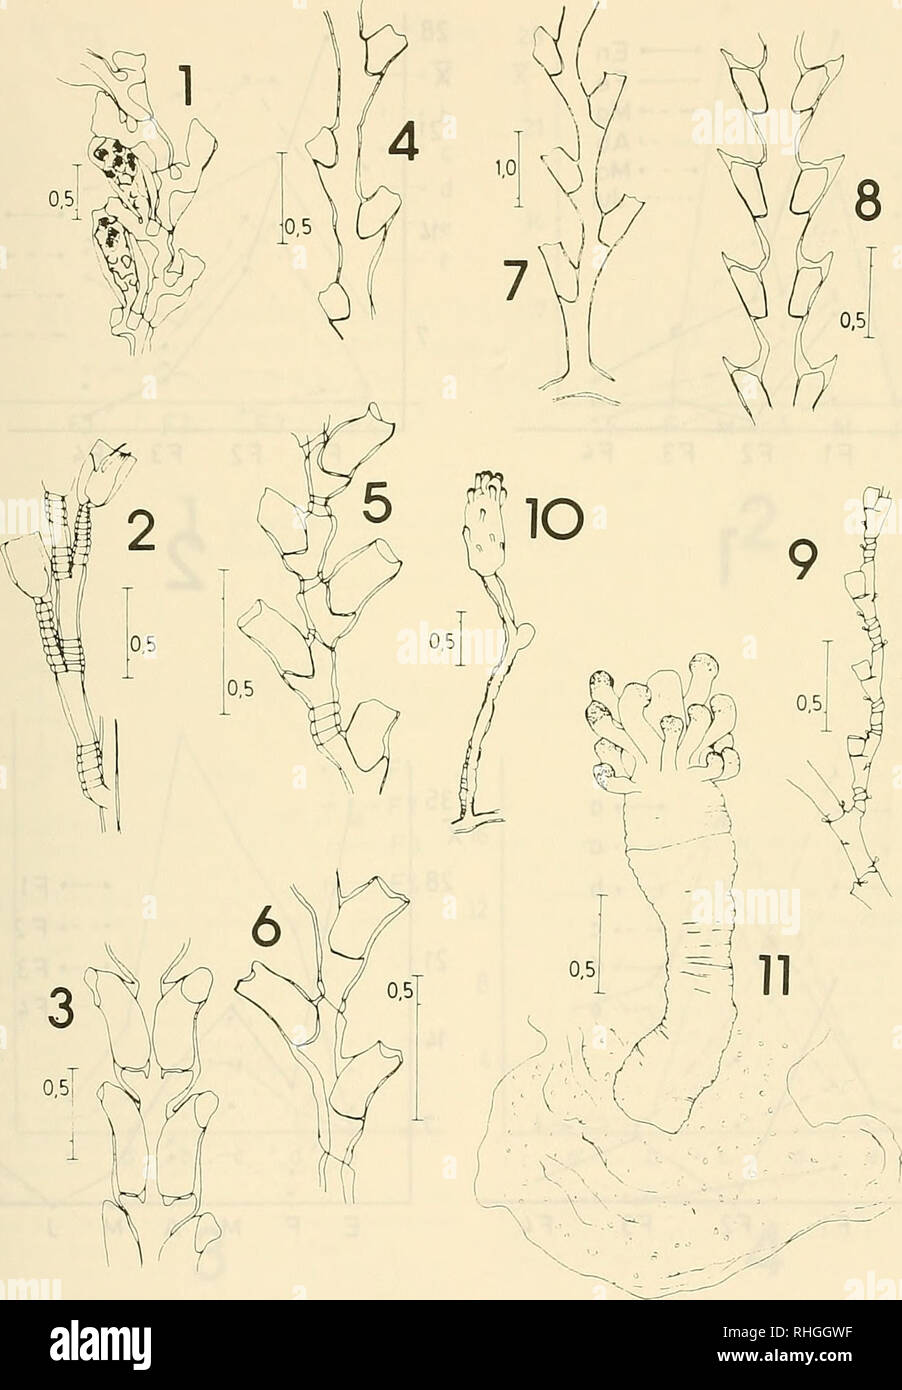 . Boletin de la Sociedad de Biología de Concepción. Sociedad de Biología de Concepción; Biology; Biology. Bol. Soc. Biol. Concepción, Chile. Tomo 59, 1988. Lámina 4.-Fig. l.-Laomcdca gemculutu, con gonotecas; 2.- Obclia hyalina; 3.- Parathuiariu poliiritrpa; 4.- Fam. Sertularidae sp. 1.; 5.- Fam. Sertularidae sp. 2.; 6.- Symplcctosctiphus glackilix; 7.- Symplec- tosciiphus modestus; 8.- Diphasia sp.; 9.- Pluviulariu sclacetr, 10.- Coryne repcns; 11.- Hydnictmm sp. 129. Please note that these images are extracted from scanned page images that may have been digitally enhanced for readability - c Stock Photo